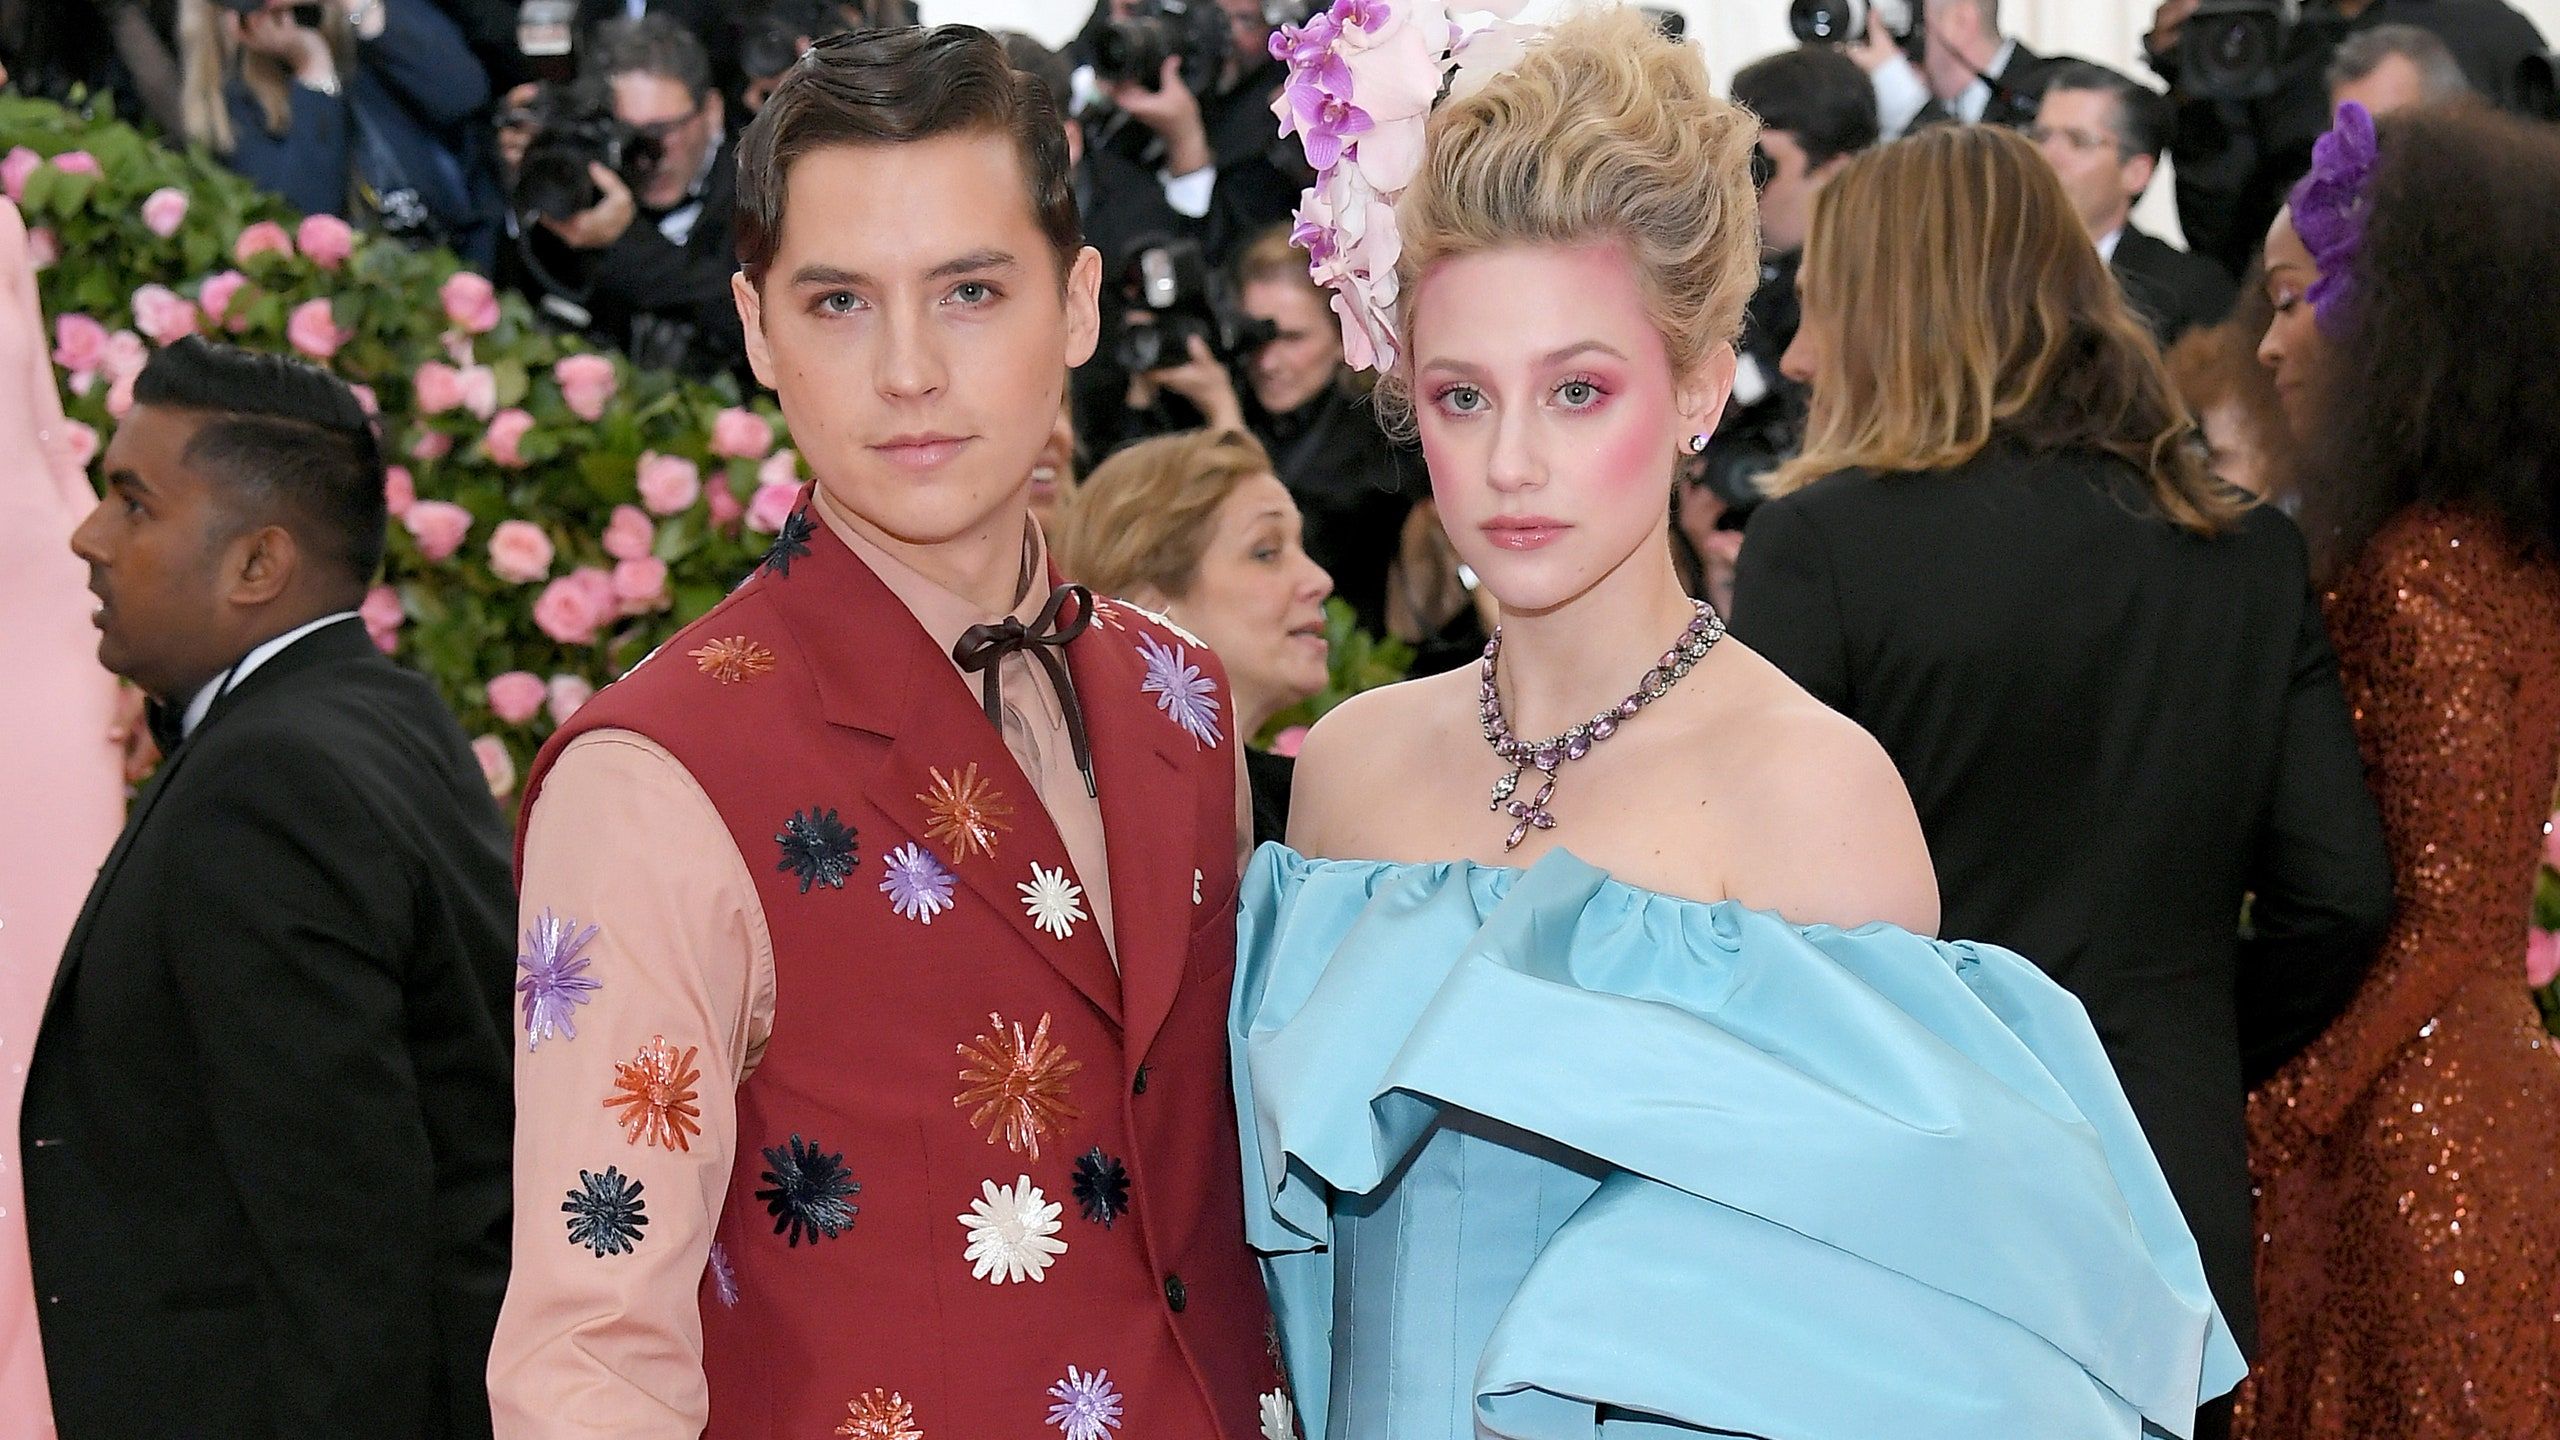 Riverdale Stars Cole Sprouse and Lili Reinhart Have Reportedly